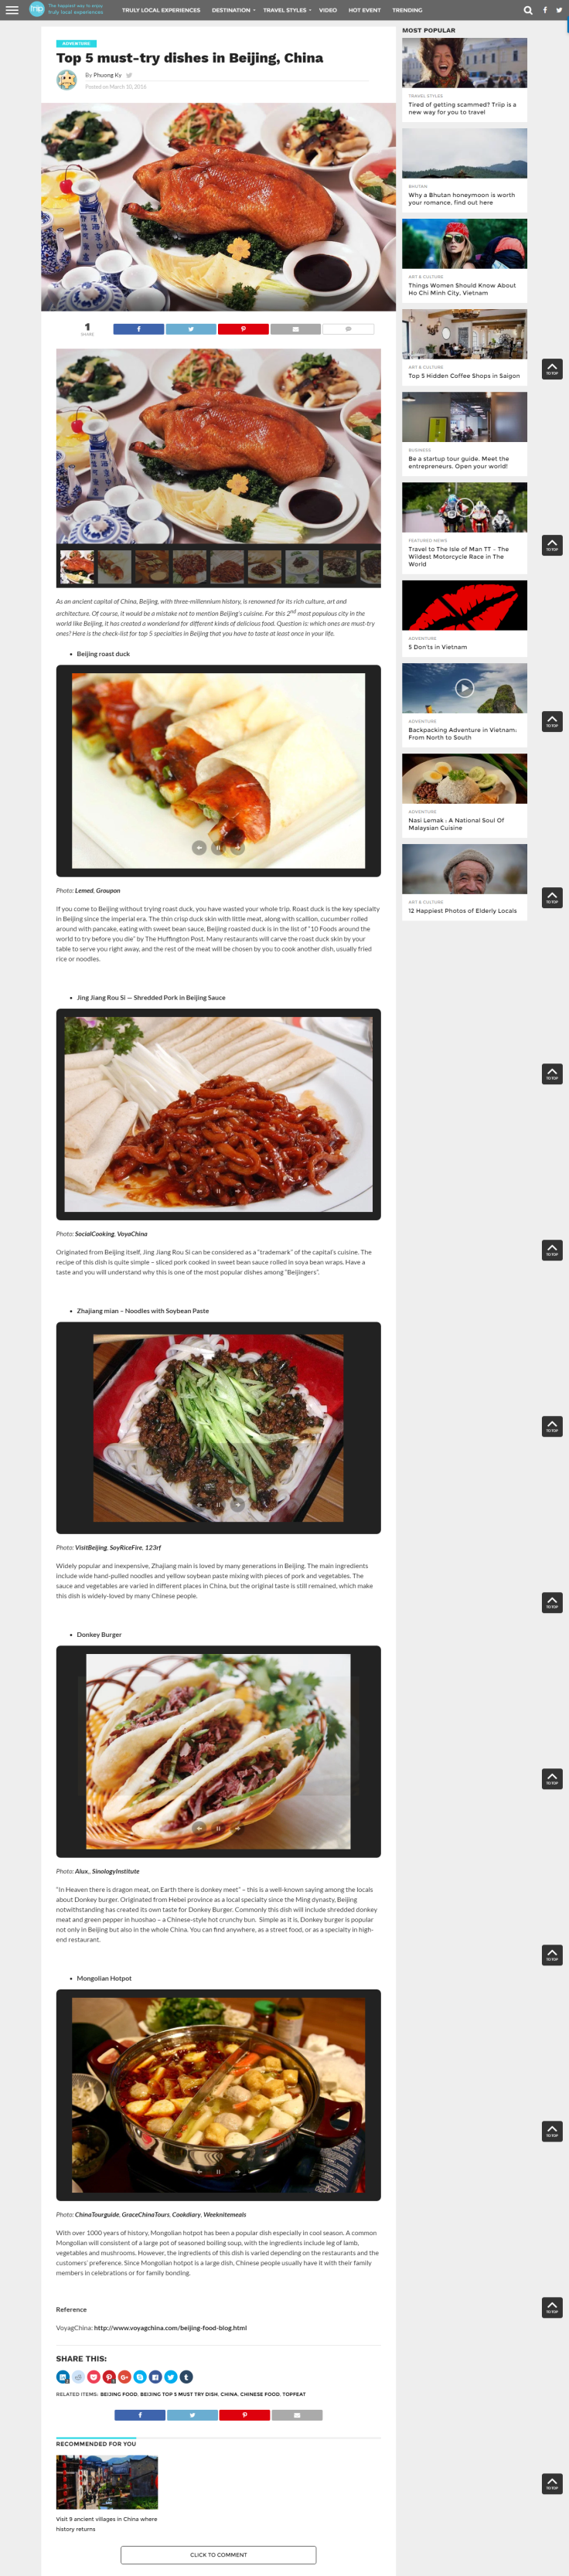 screencapture-livinglocal-triip-me-top-5-must-try-dishes-beijing-1473921152183